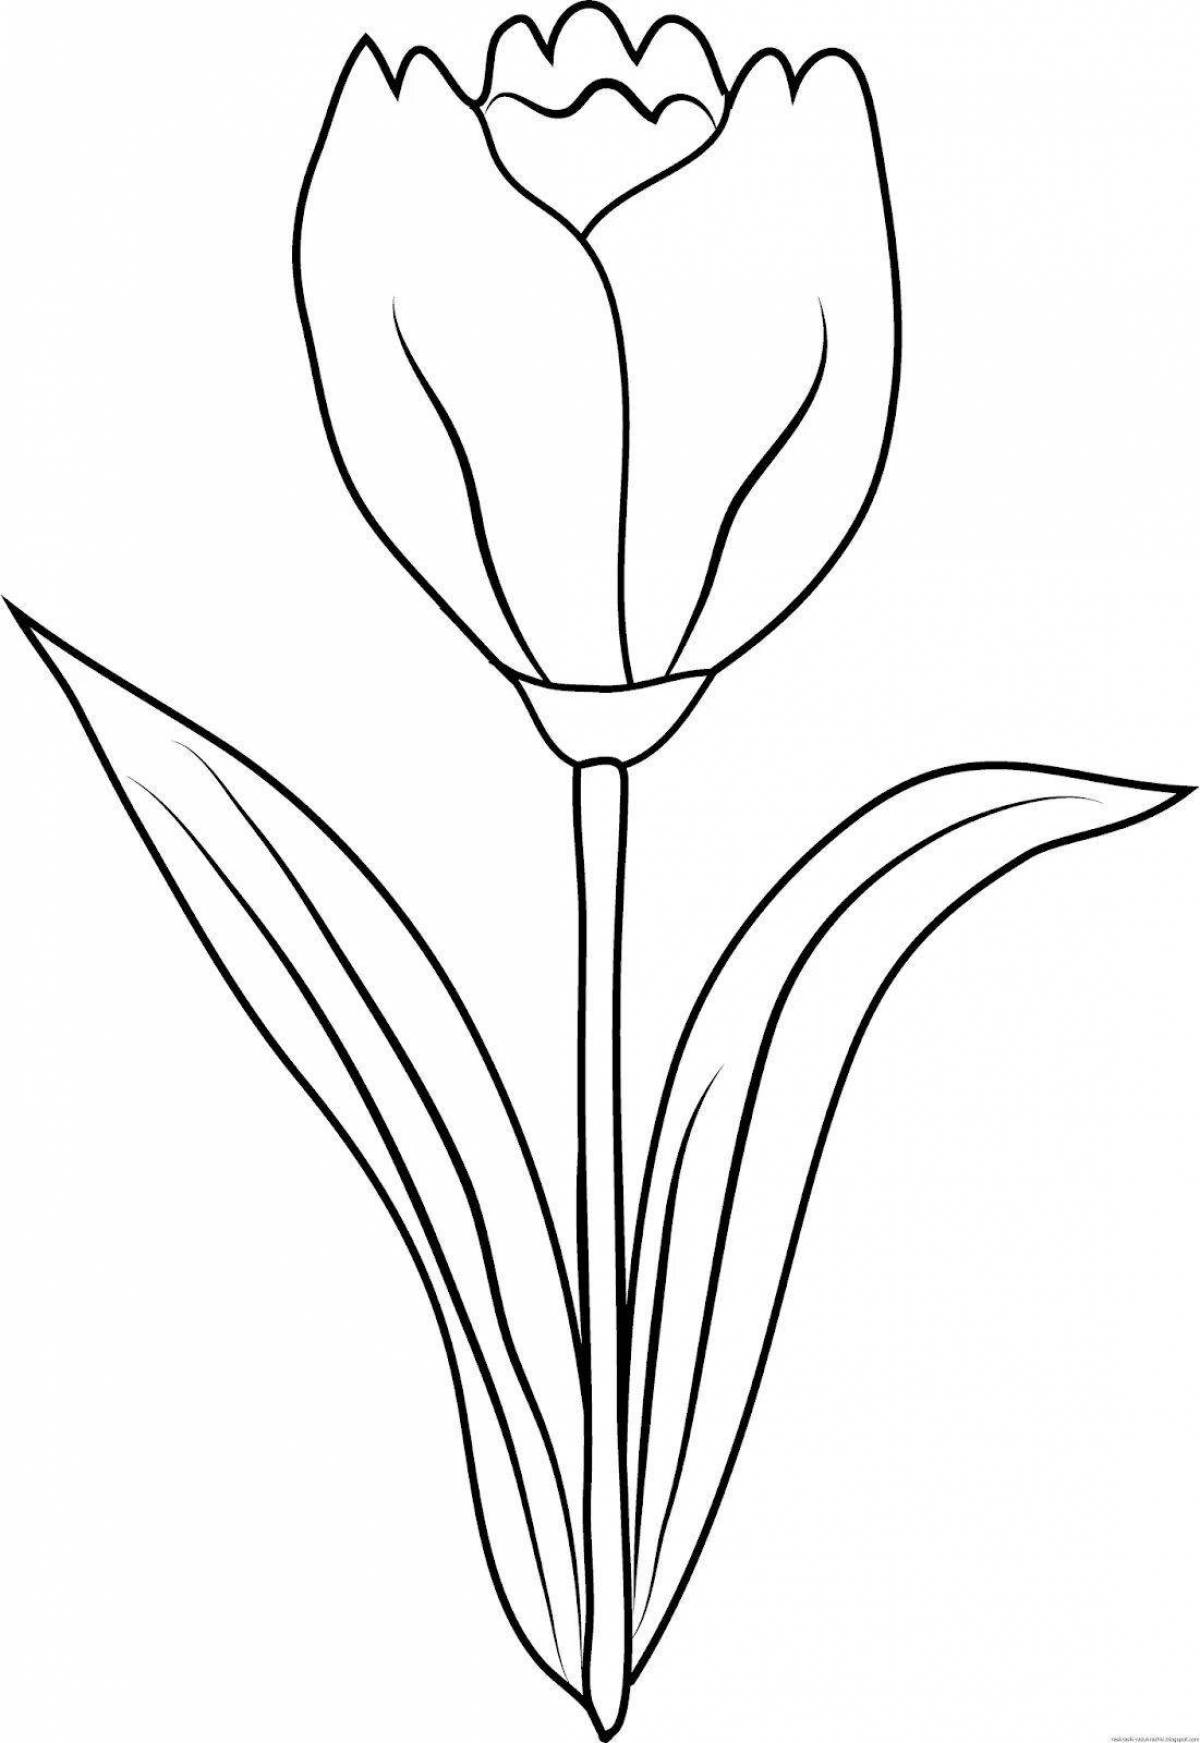 A fun coloring book for kids with tulips